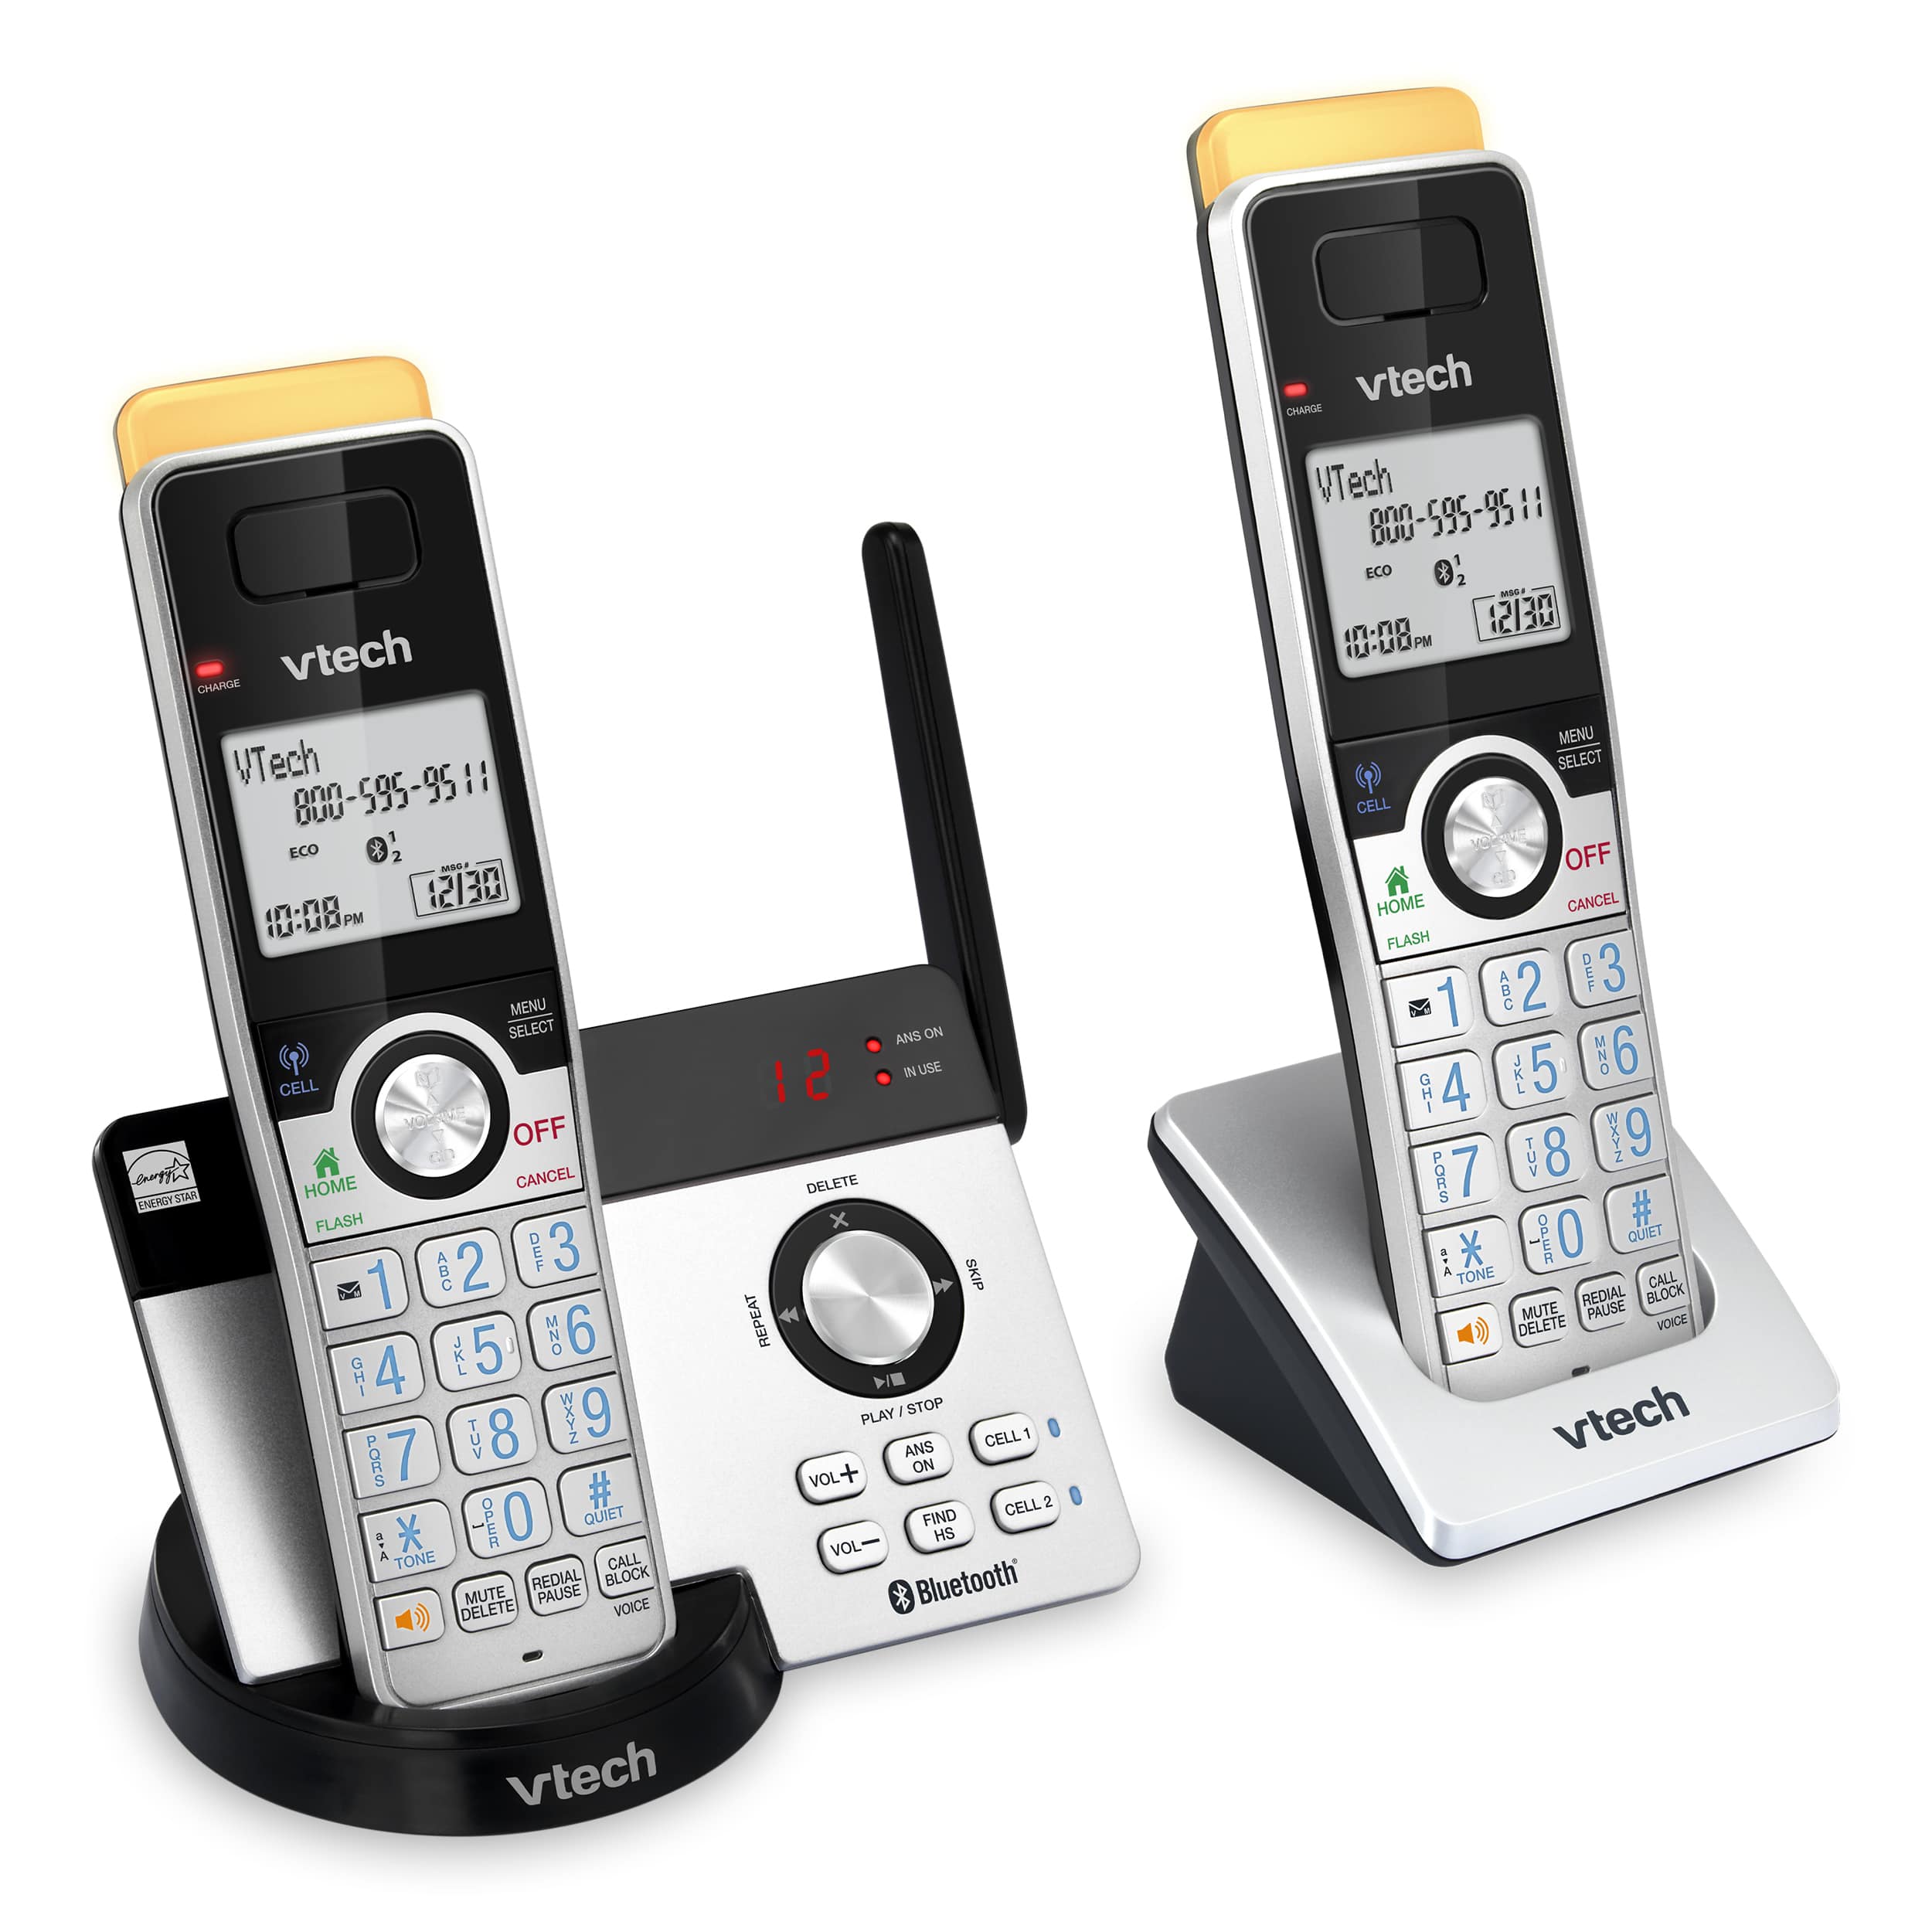 2-Handset Expandable Cordless Phone with Super Long Range, Bluetooth Connect to Cell, Smart Call Blocker and Answering System